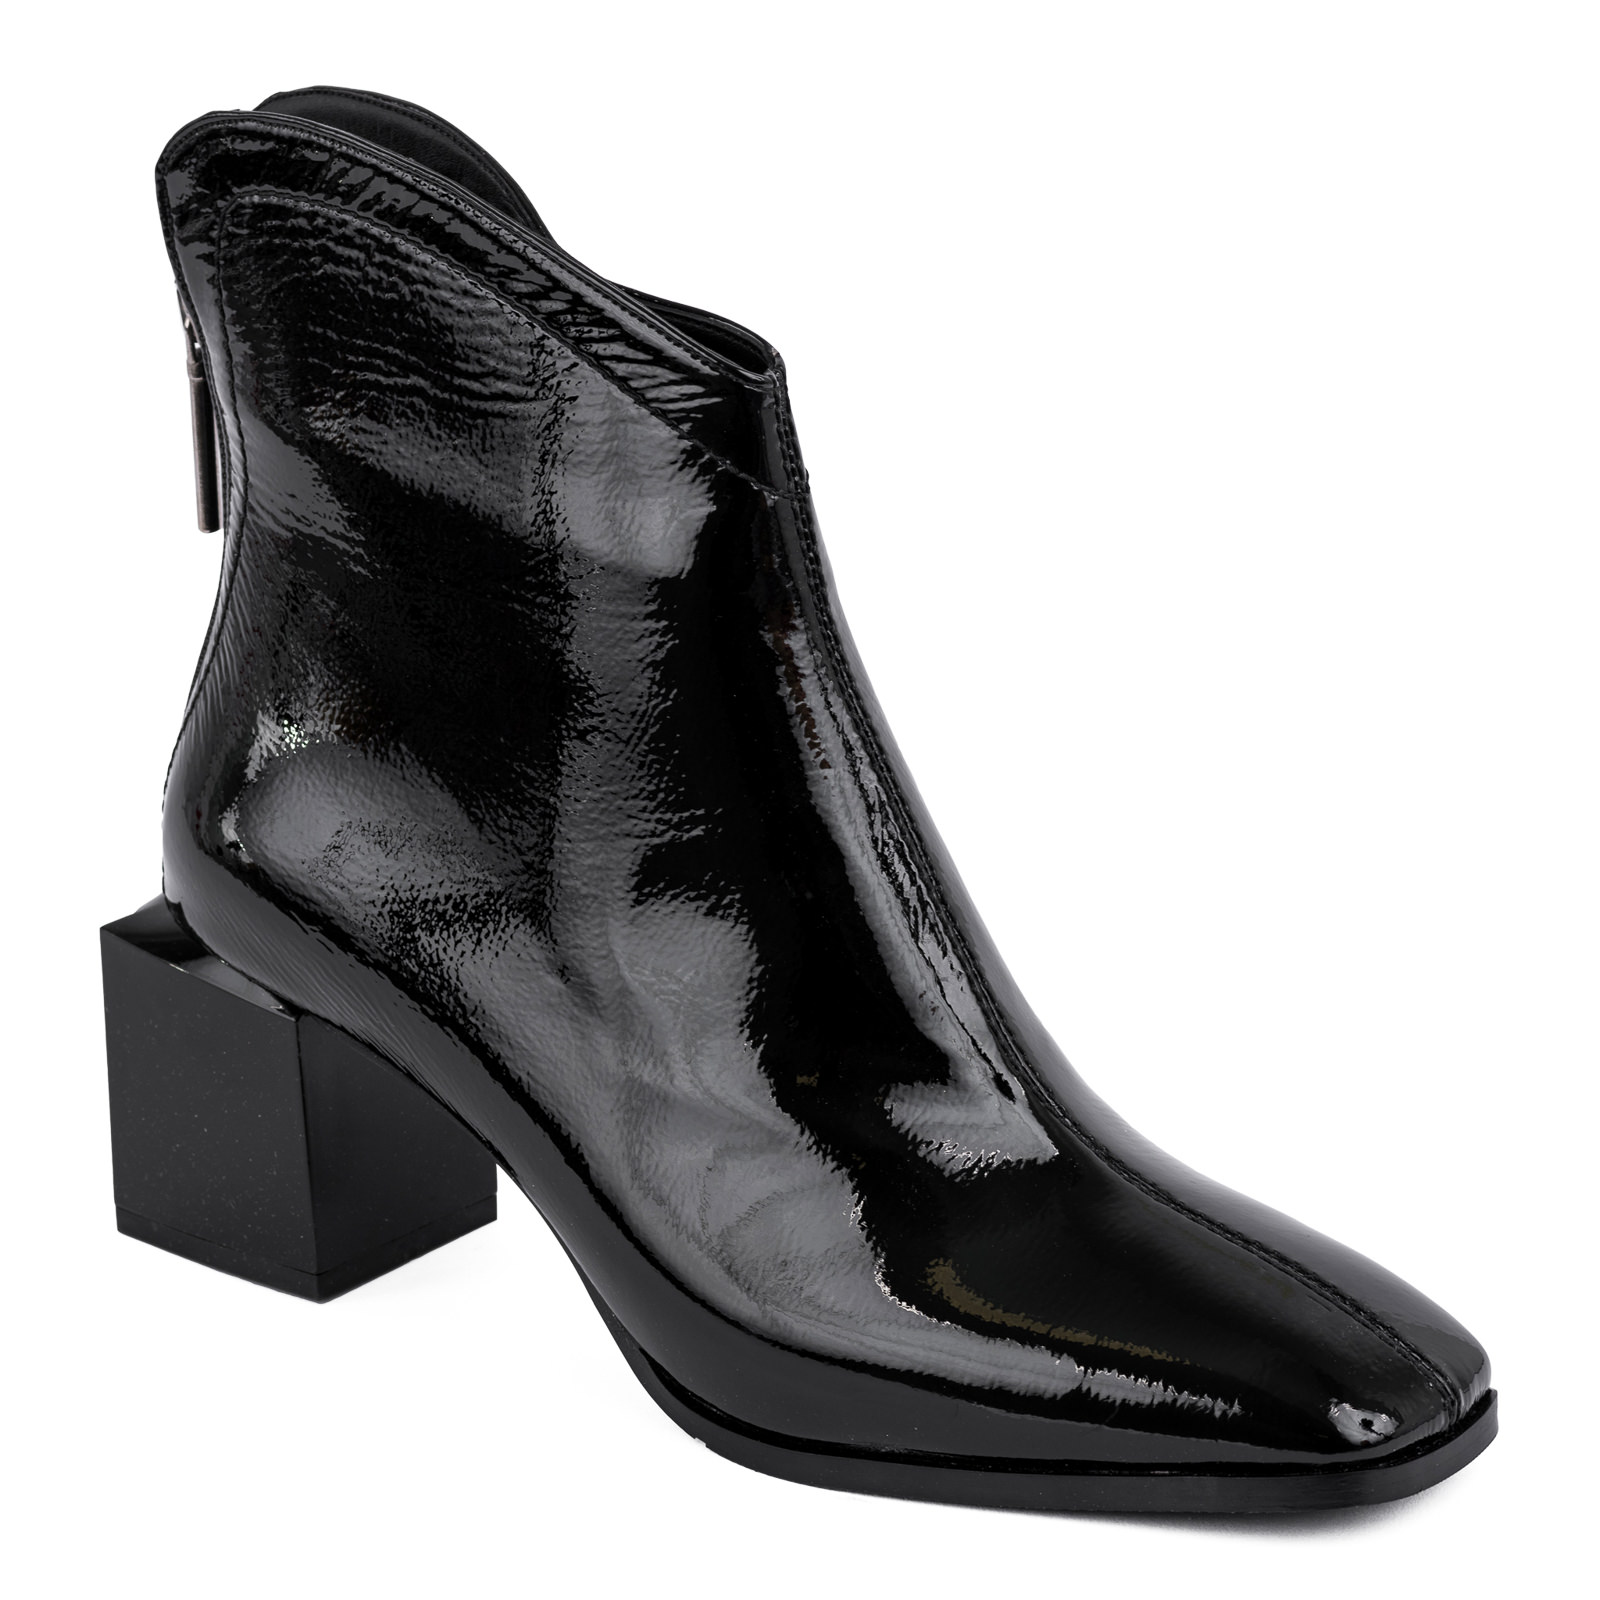 PATENT ANKLE BOOTS WITH ZIPPER AND BLOCK HEEL - BLACK